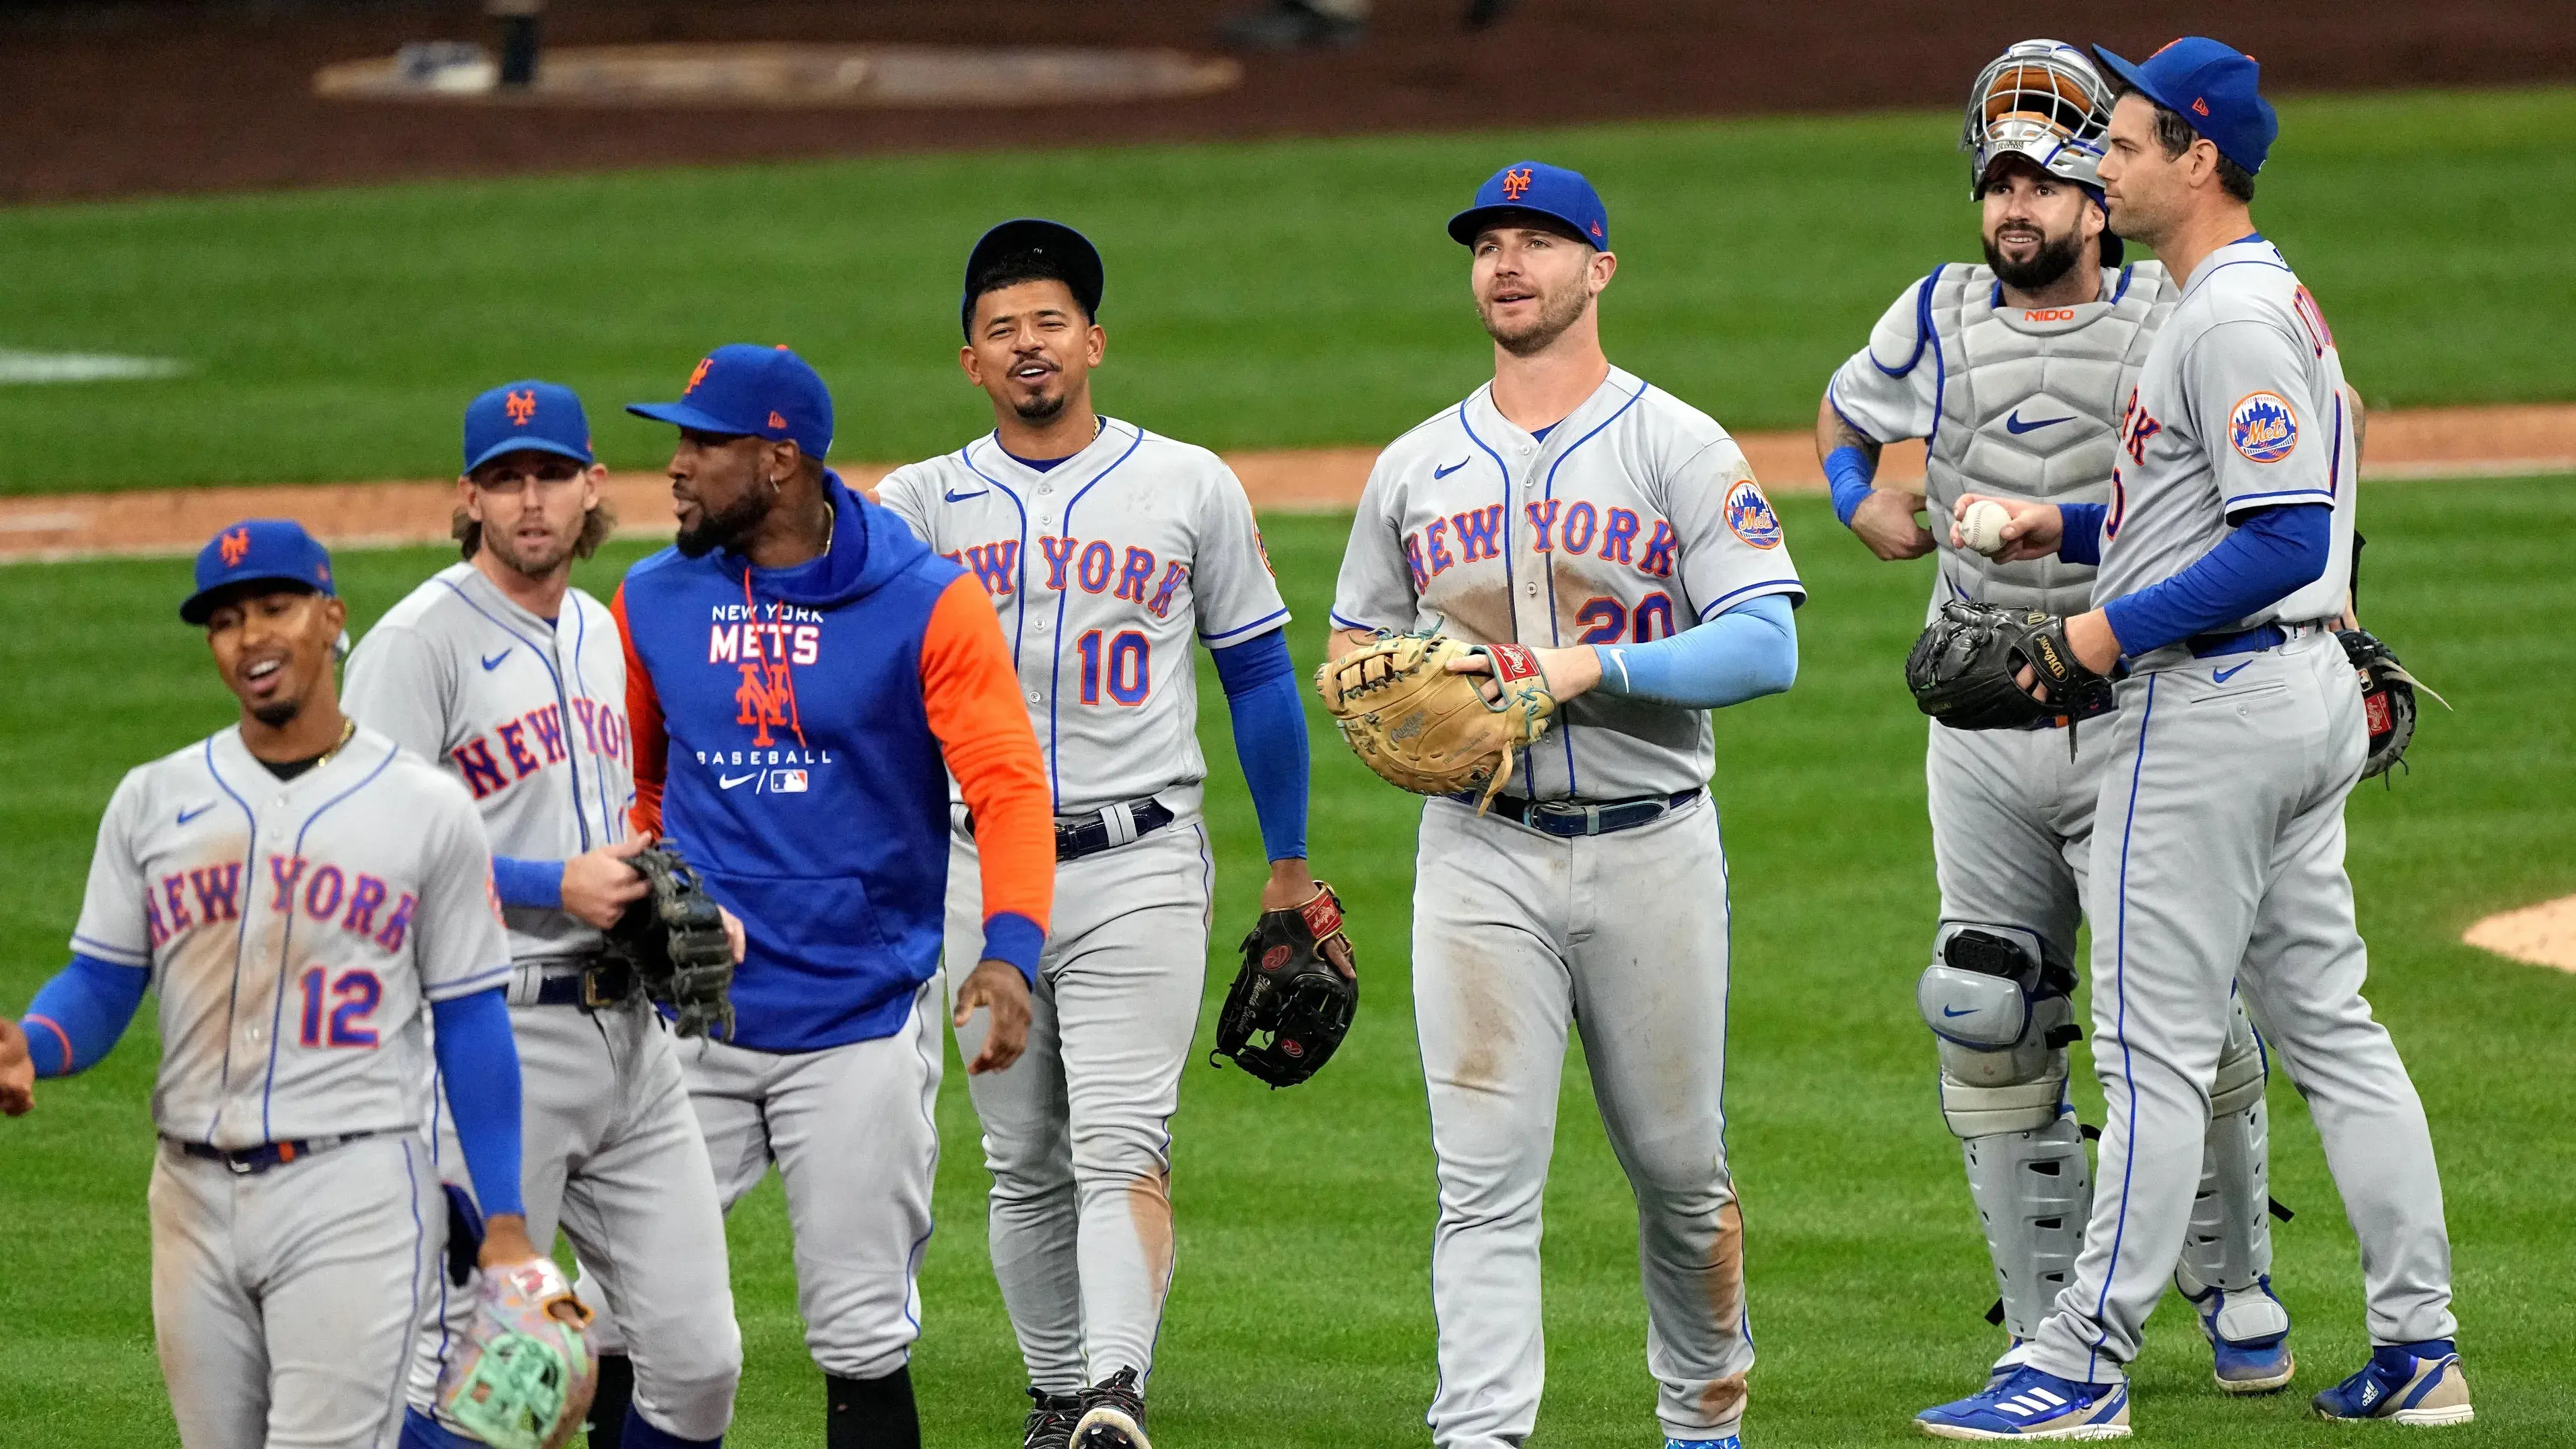 The New York Mets celebrate clinching a playoff berth after beating the Milwaukee Brewers 7-2. / MARK HOFFMAN/MILWAUKEE JOURNAL SENTINEL / USA TODAY NETWORK